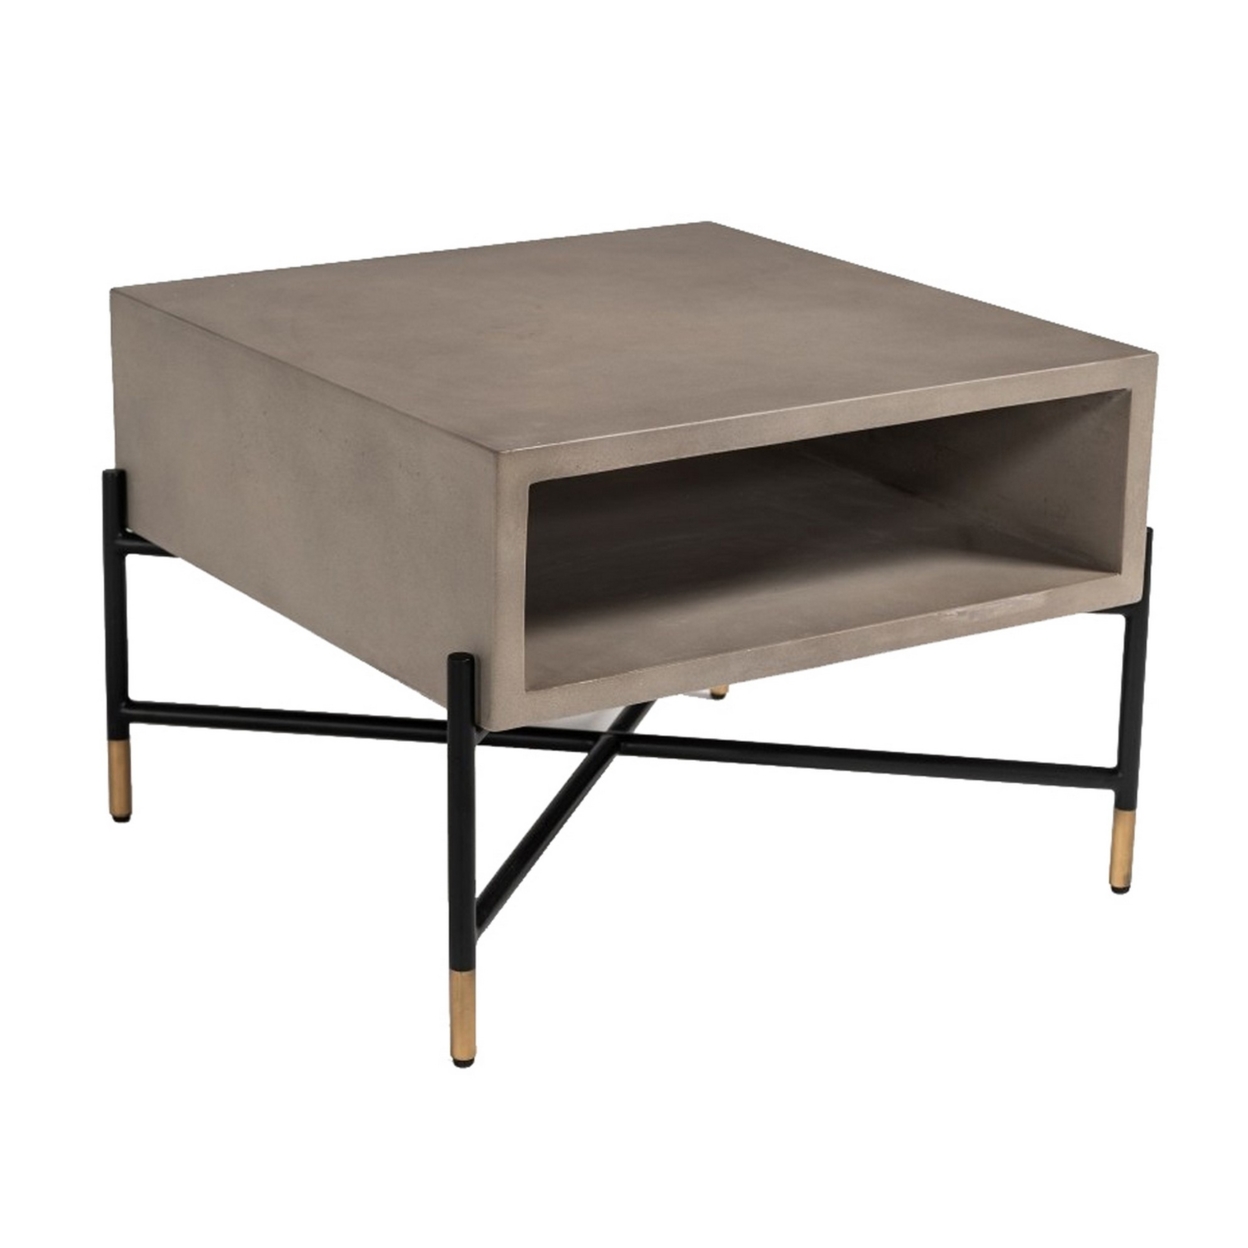 Concrete Coffee Table With Metal Frame And Open Compartment, Gray And Black- Saltoro Sherpi